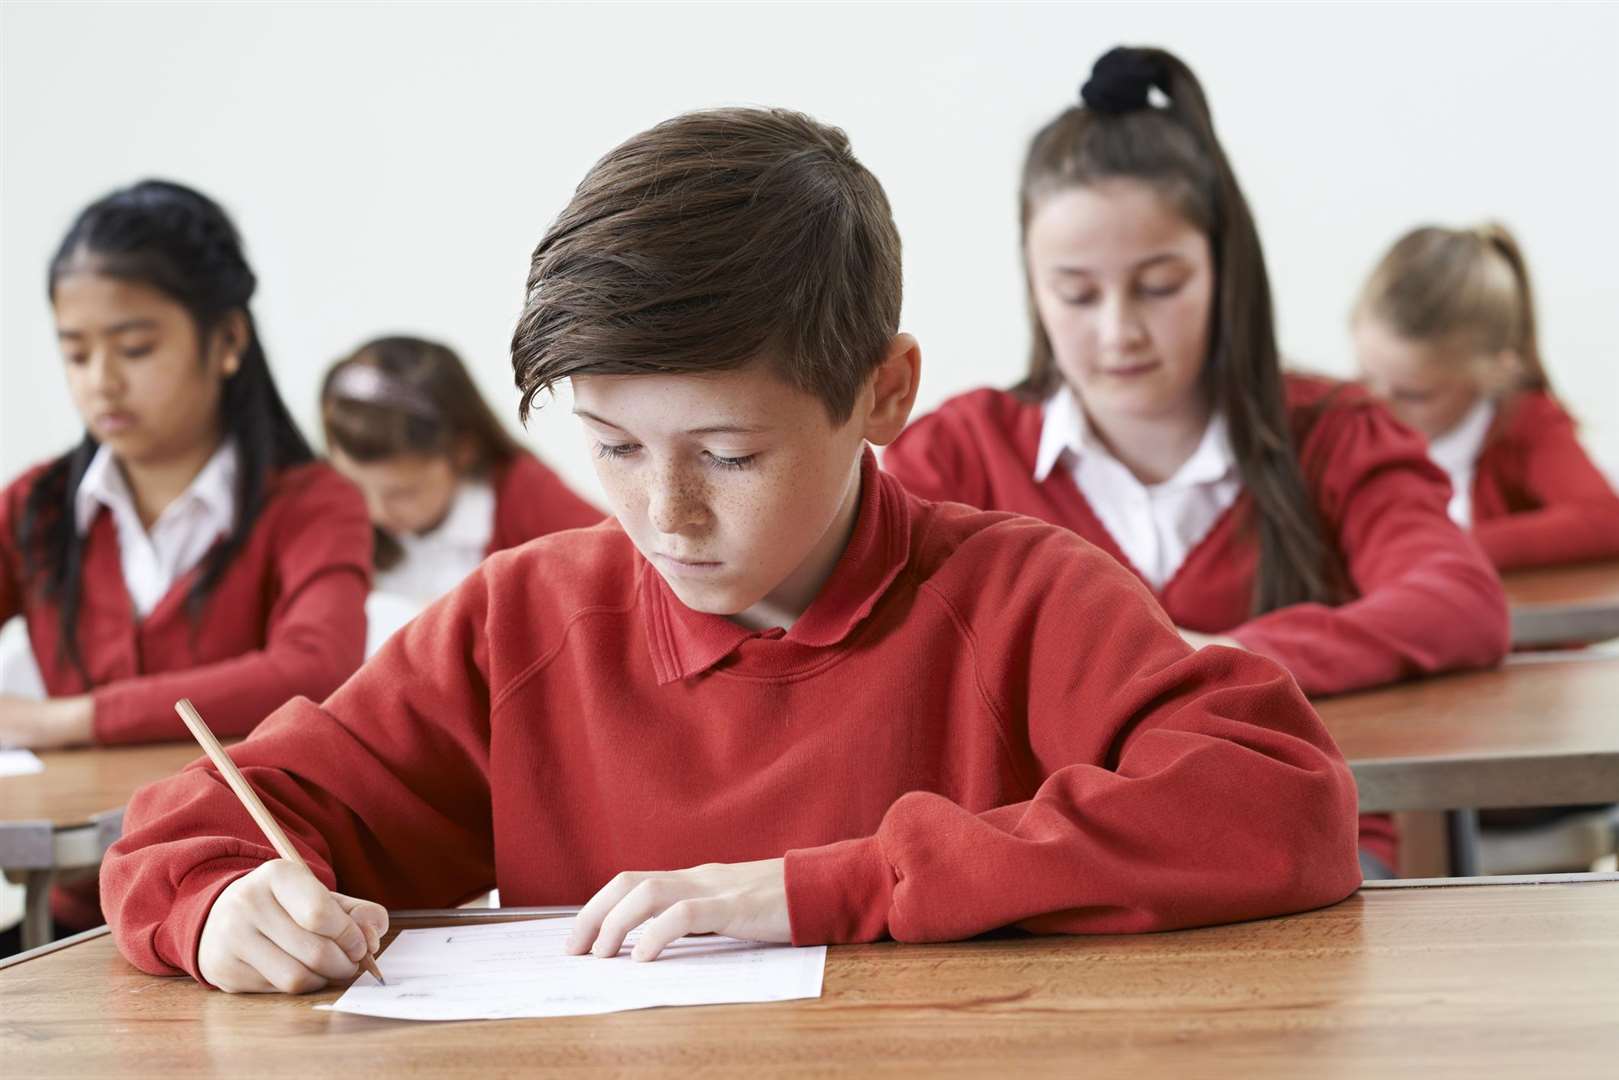 More than 16,500 pupils took the Kent Test this year